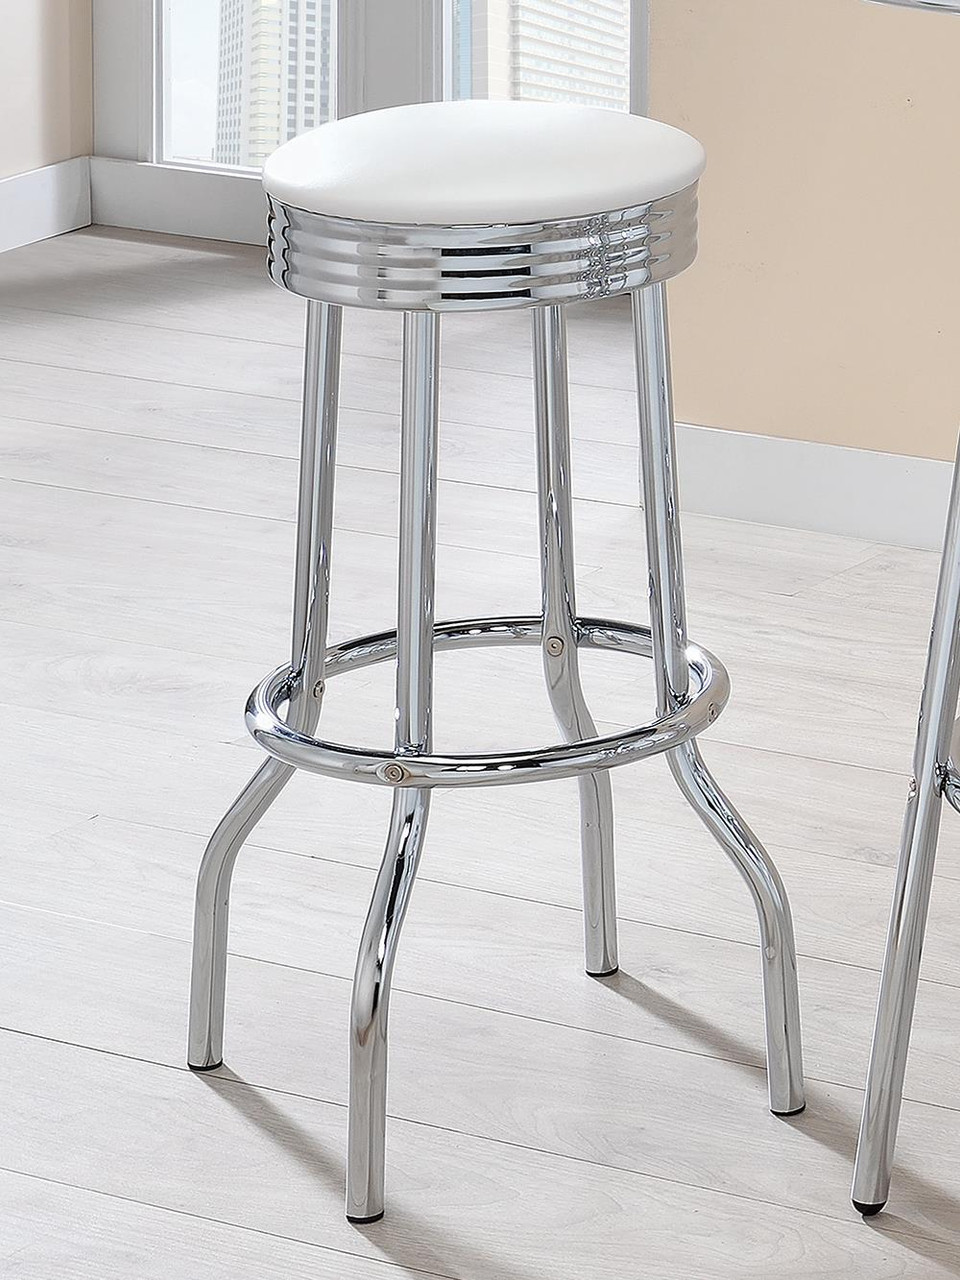 The White - Upholstered Top Bar Stools White And Chrome (Set of 2) - 2299W  available at Jake's Furnishings serving Lincoln, IL.